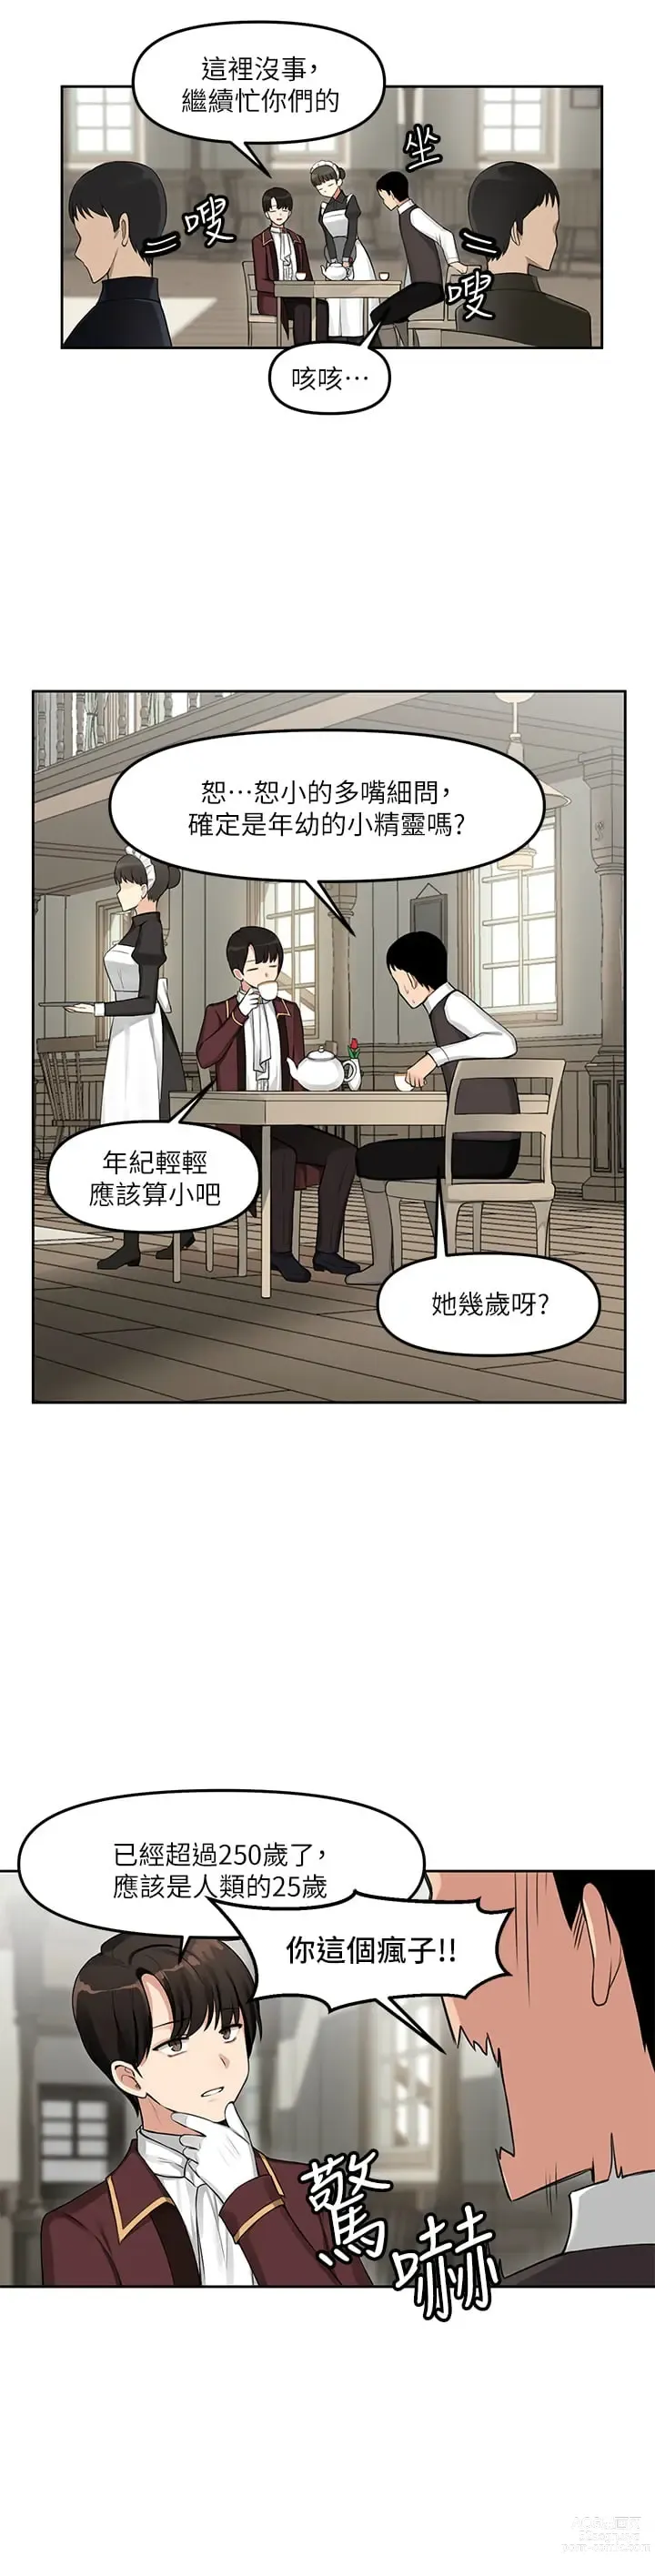 Page 4 of manga 抖M女仆/ Elf Who Likes To Be Humiliated